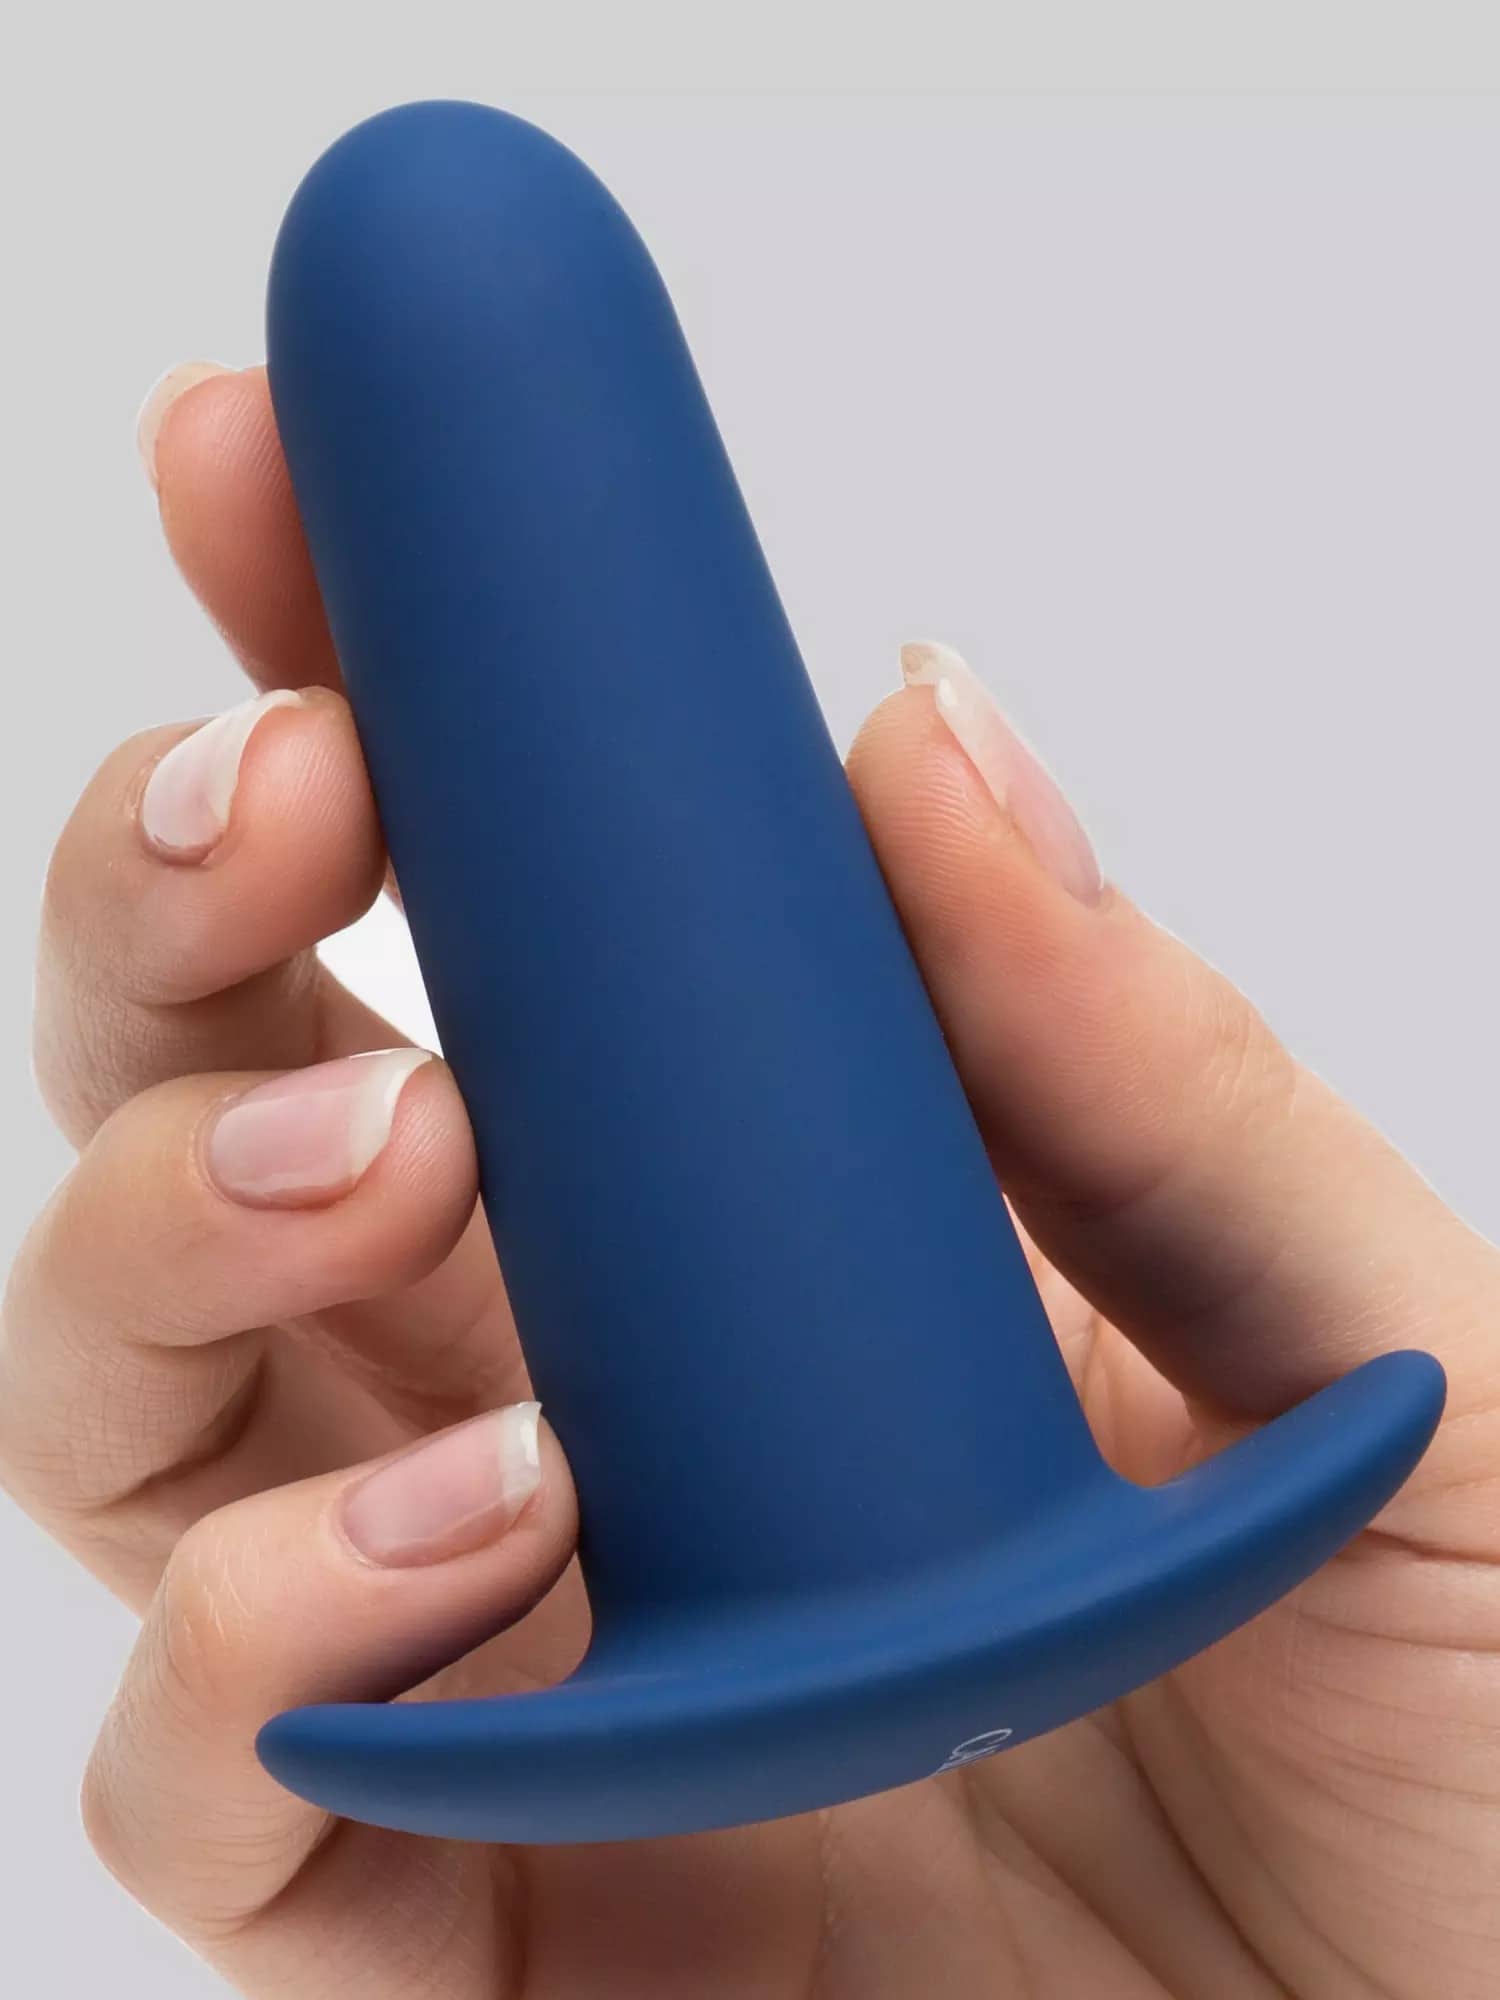 They-ology Wearable Anal Training Set . Slide 5